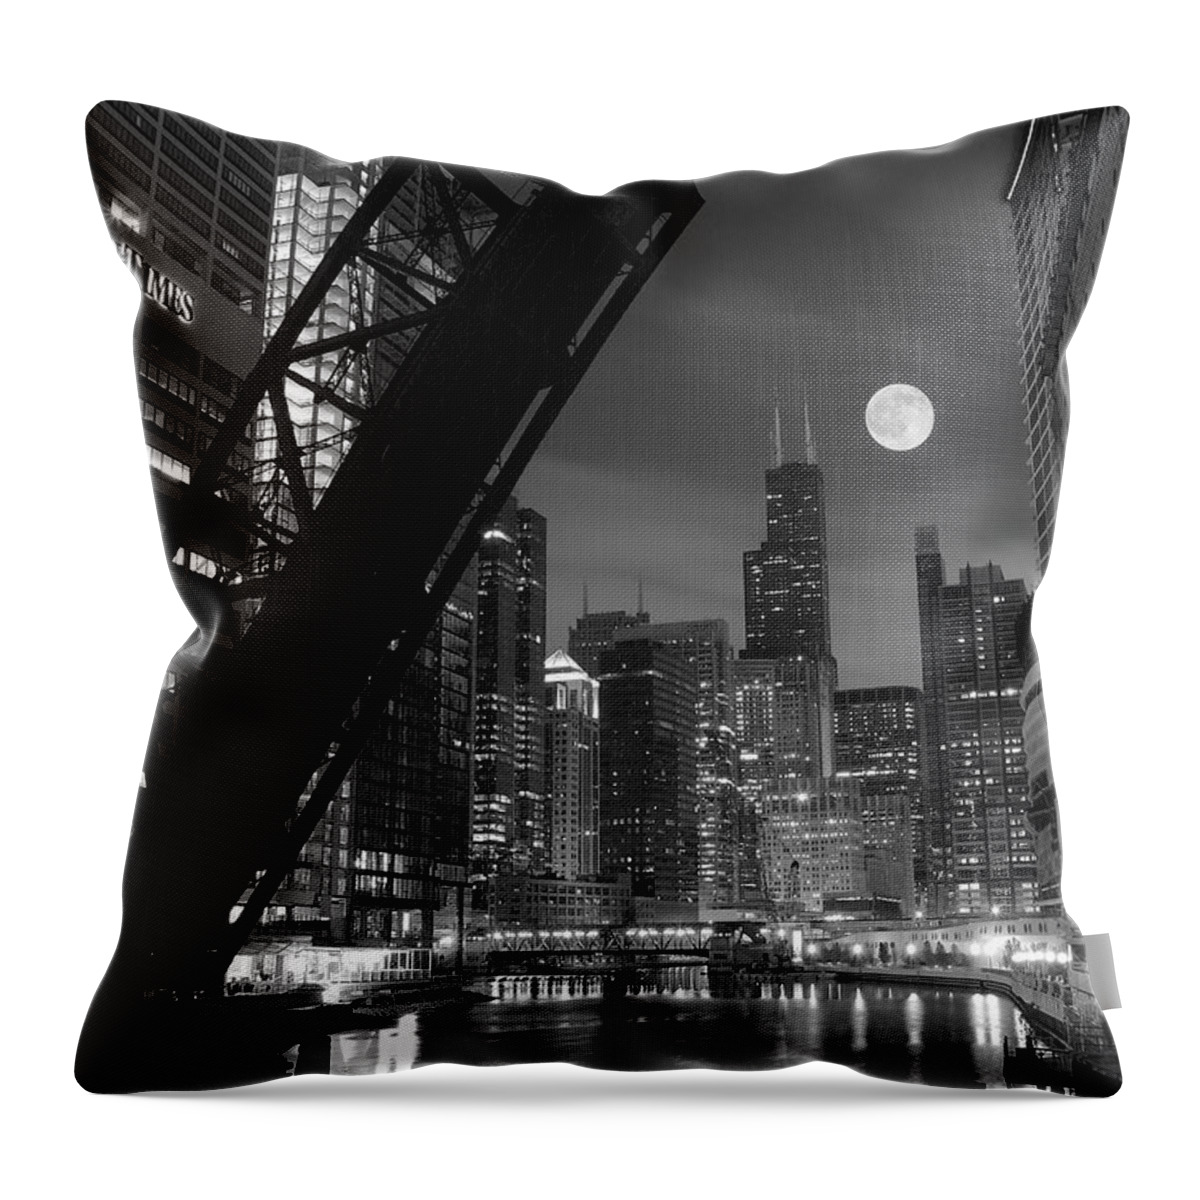 Chicago Throw Pillow featuring the photograph Chicago Pride of Illinois by Frozen in Time Fine Art Photography